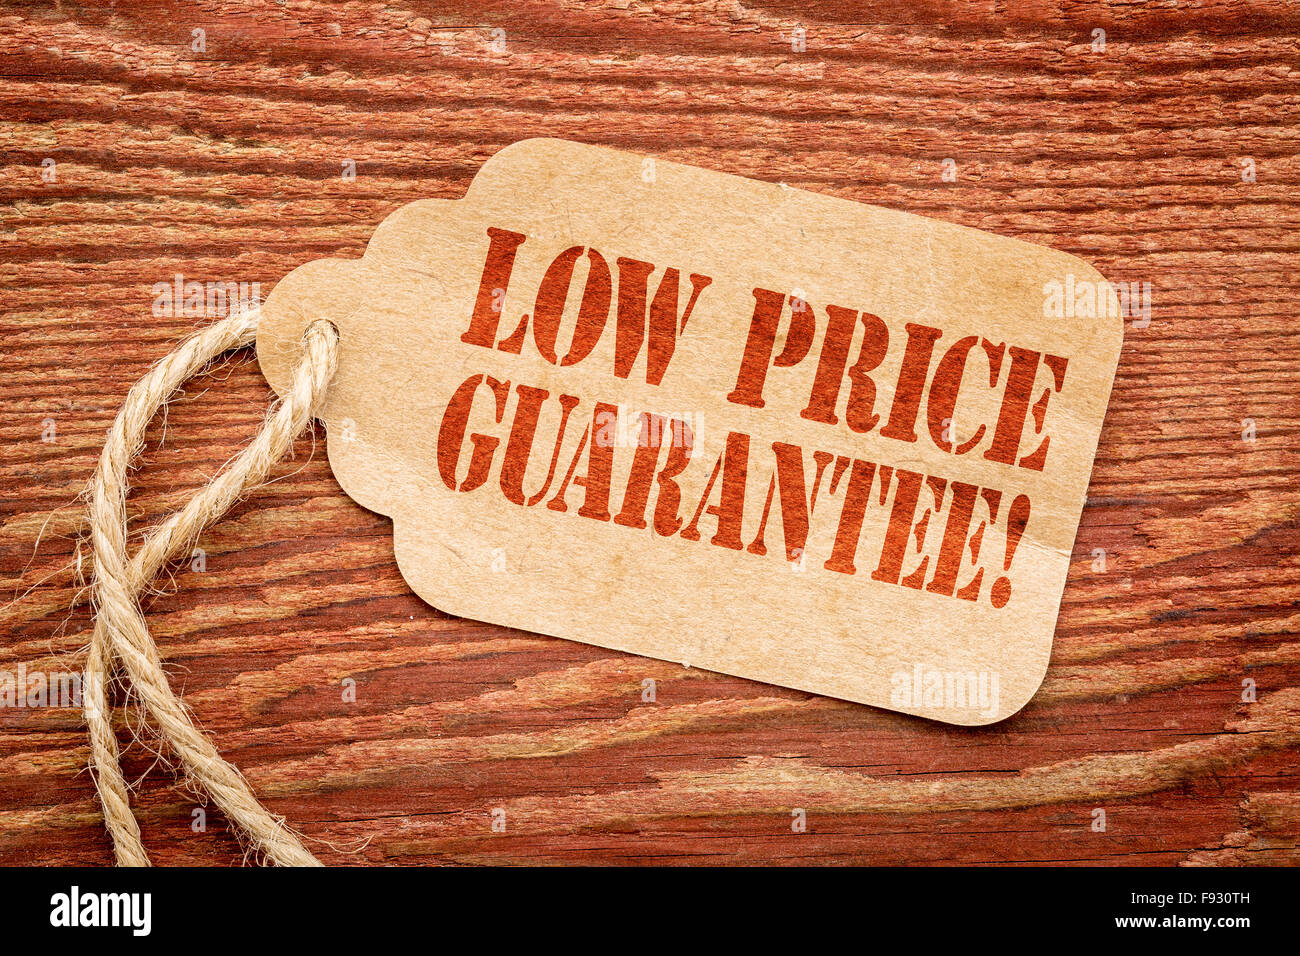 low price guarantee - sign on paper price tag against a rustic barn wood Stock Photo